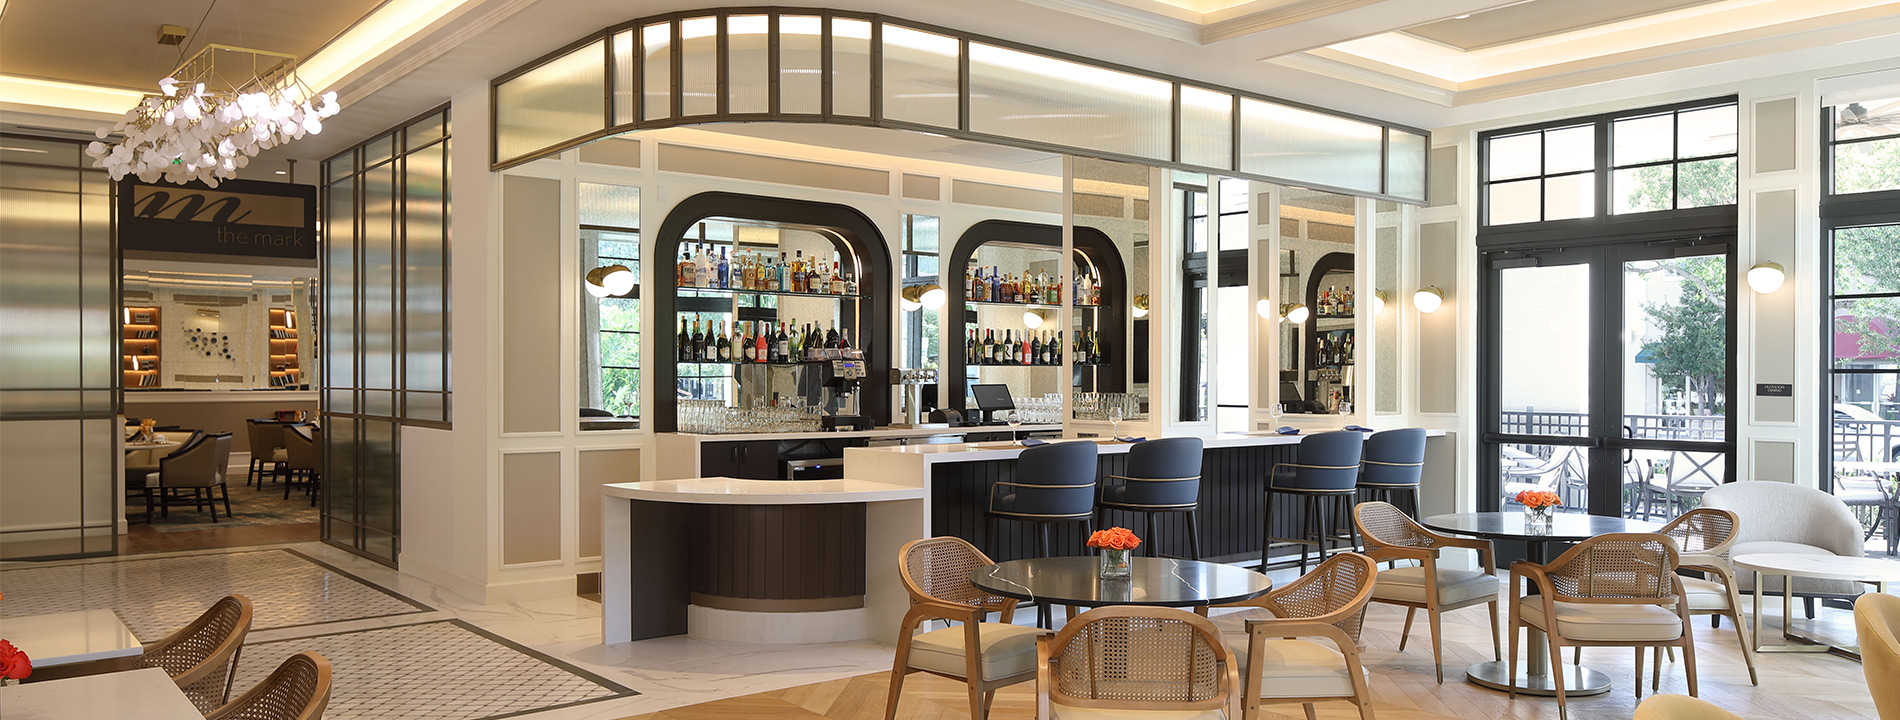 The lounge and bar at The Watermark at West Palm Beach.